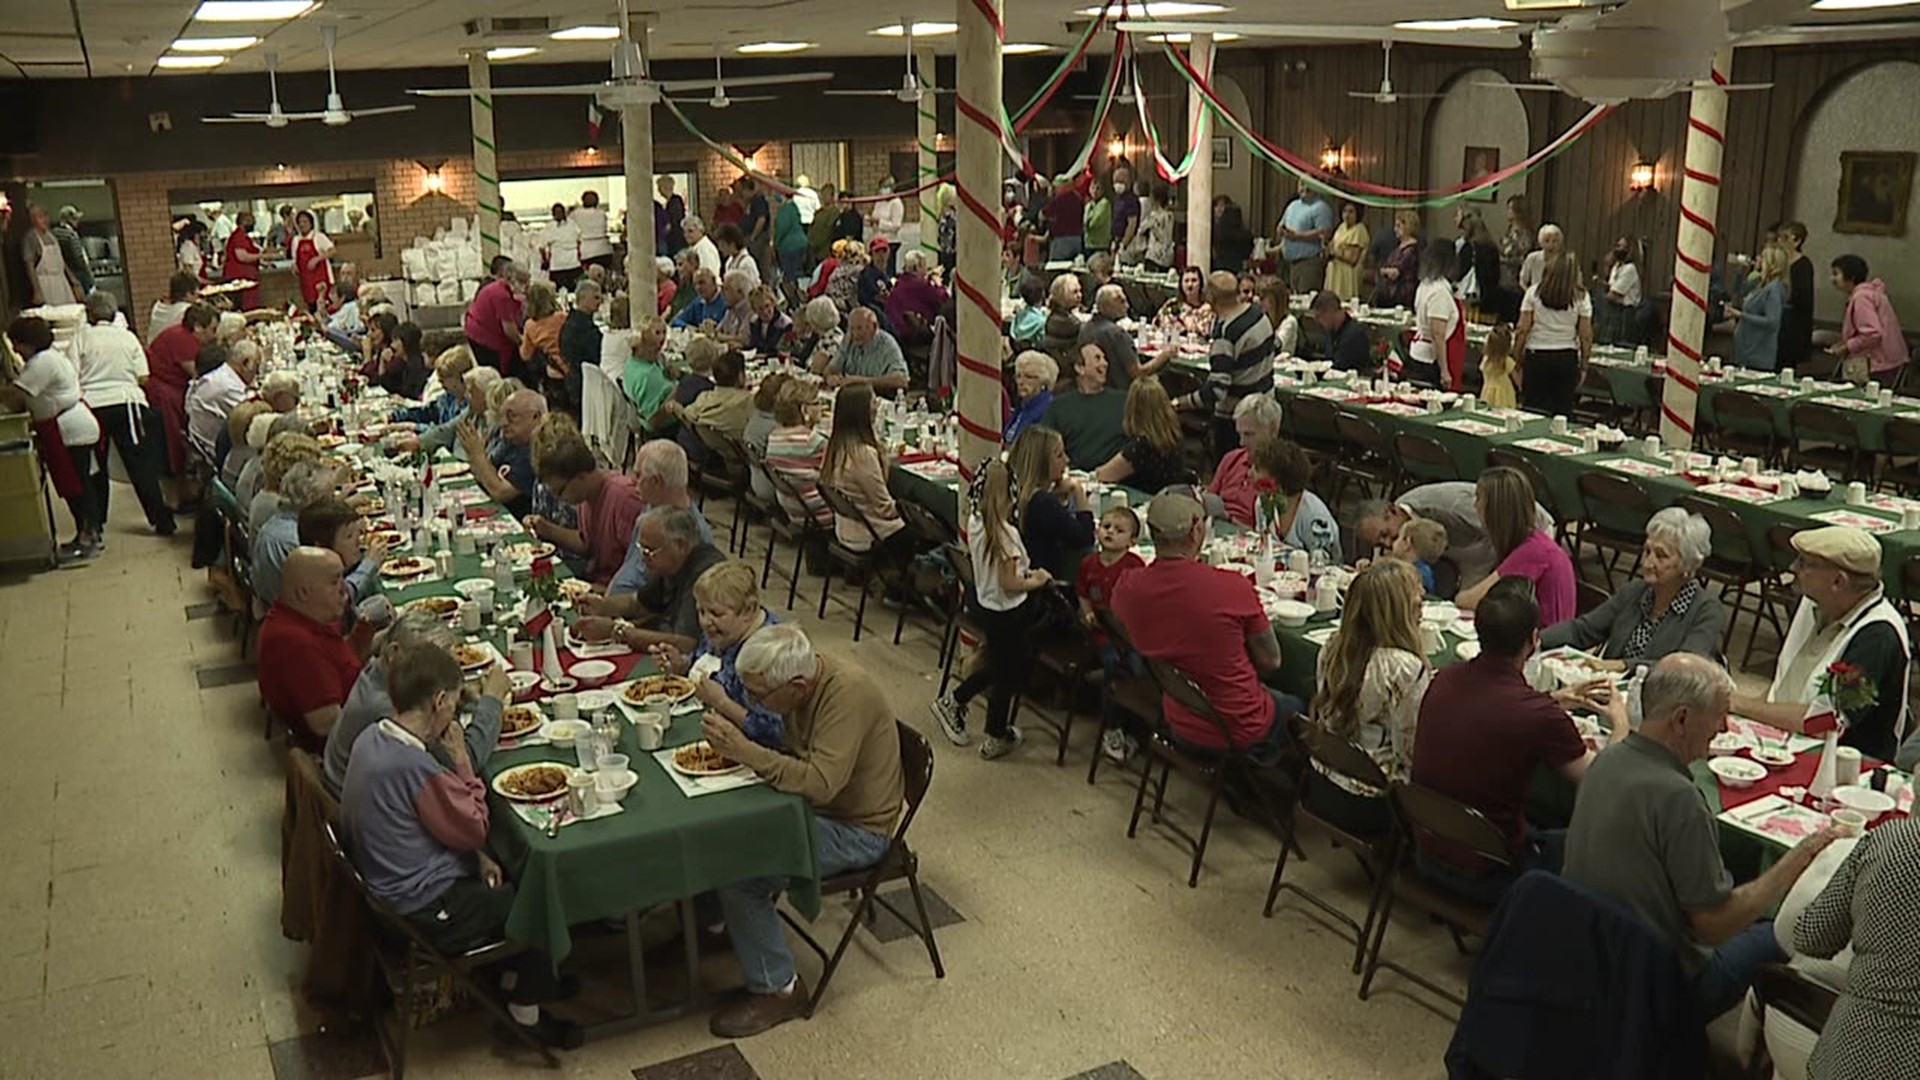 Volunteers at Our Lady of Mount Carmel Church dish up a beloved spaghetti dinner every year.